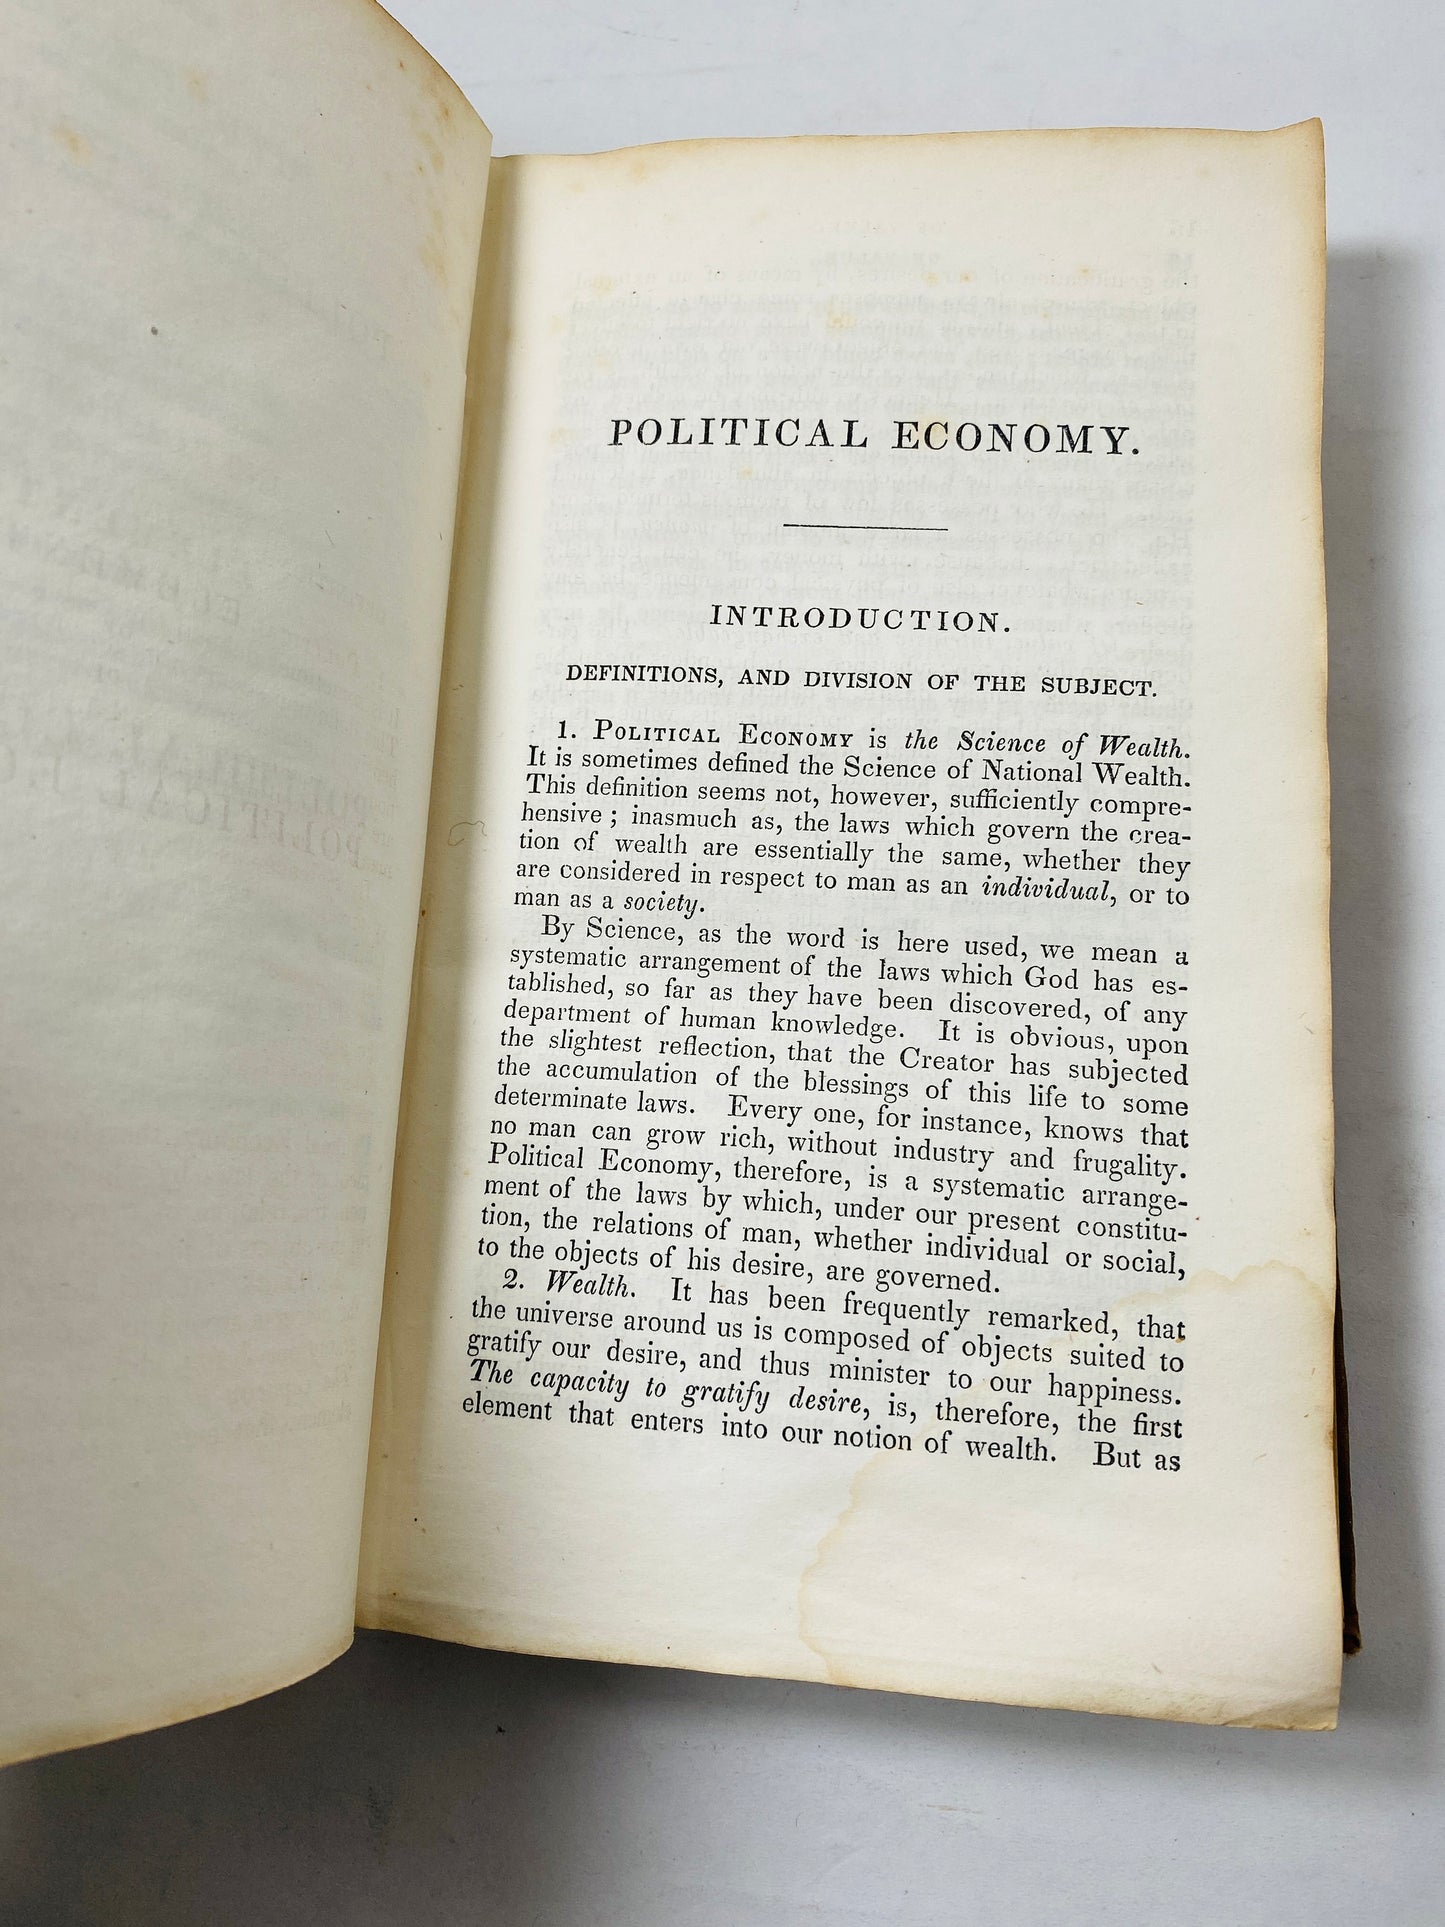 Elements of political economy vintage book by Francis Wayland circa 1851 advocate of free markets antique libertarian Republican captialism